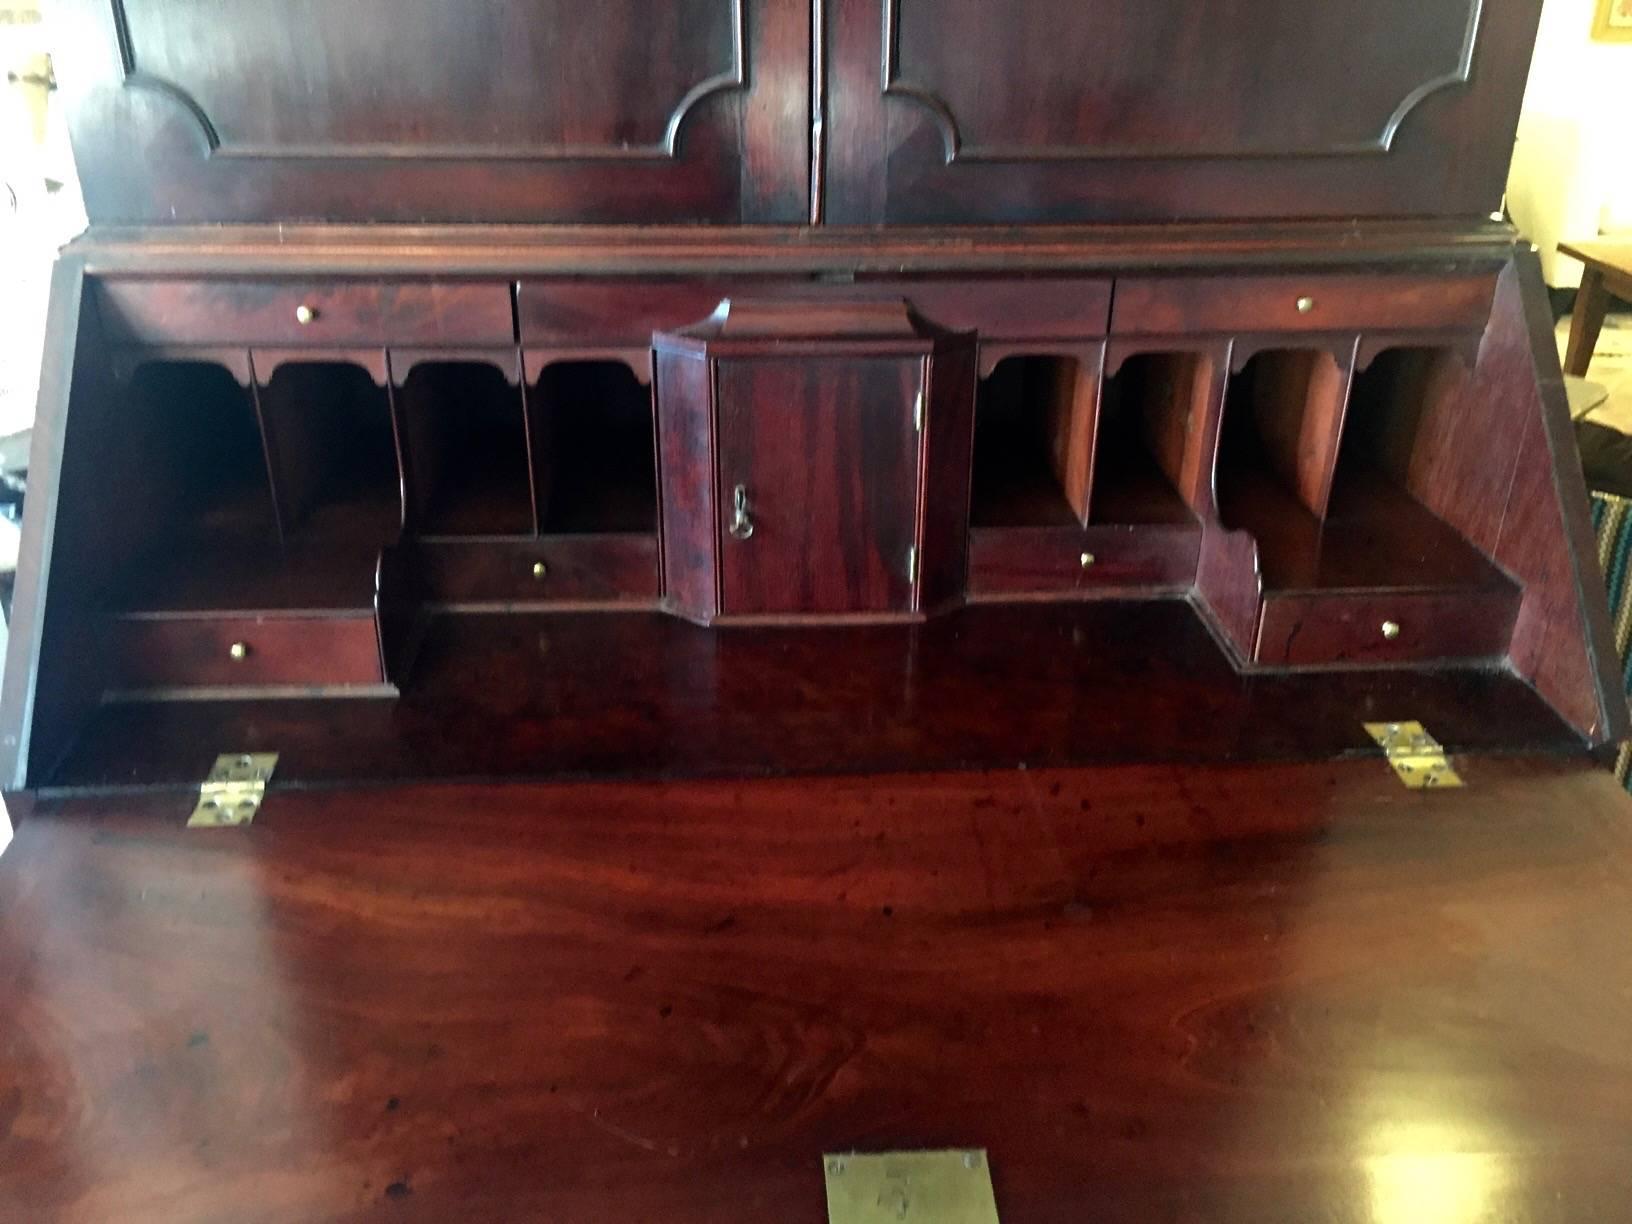 Stately Georgian solid mahogany blind door secretary having multiple adjustable shelves, full interior desk with lots of cubbies, and four drawers beneath, resting on straight bracket feet. Original hardware. Measures: 42 W base 43 W top
Desk